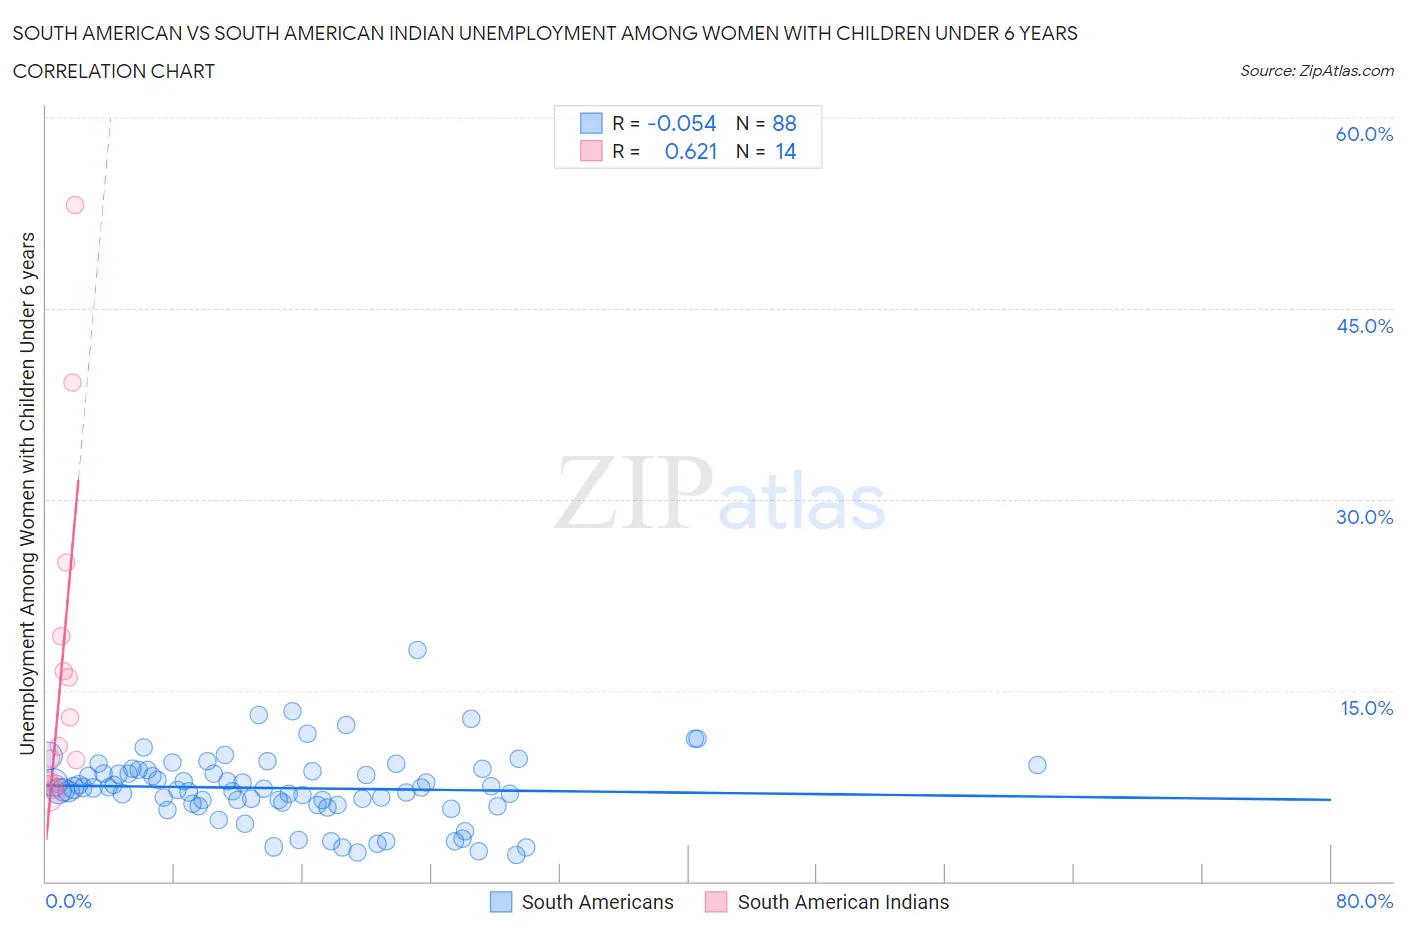 South American vs South American Indian Unemployment Among Women with Children Under 6 years